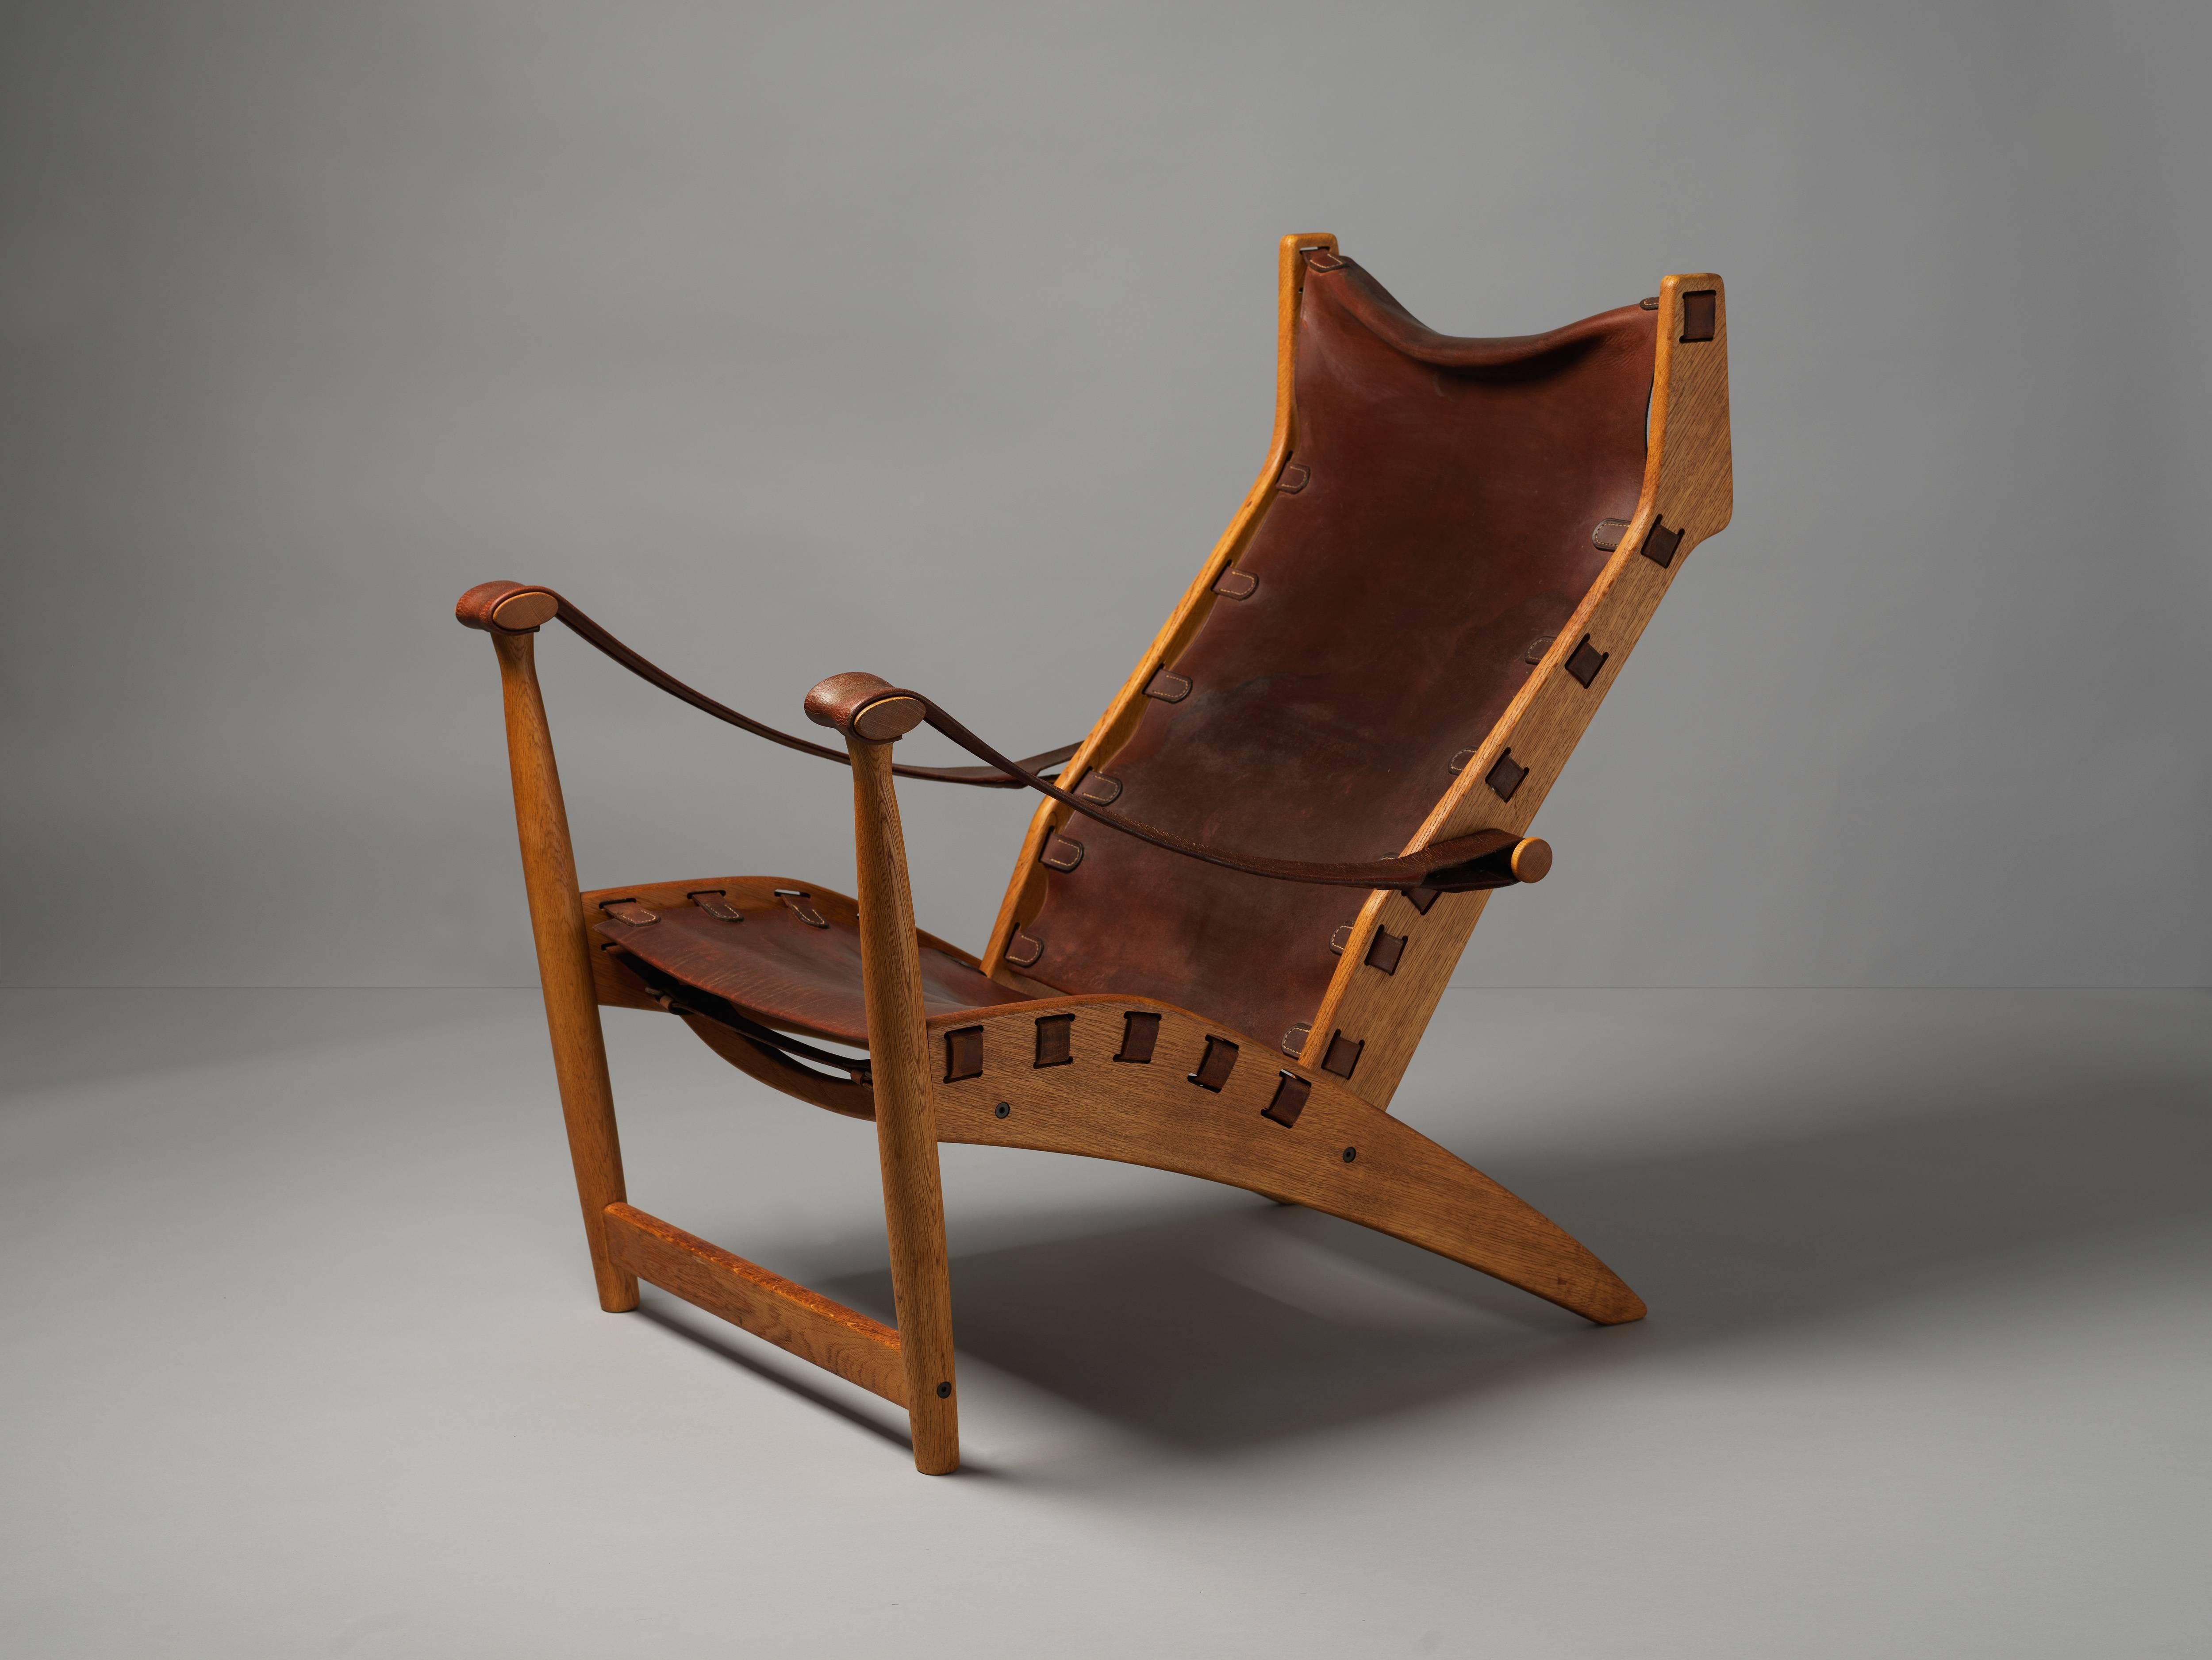 A Danish lounge chair in brown natural leather and oak, produced by Niels Vodder. The dark brown original aged saddle leather provides an elegant contrast to the patinated original oakwood. A fine example of Danish modern from one of the most